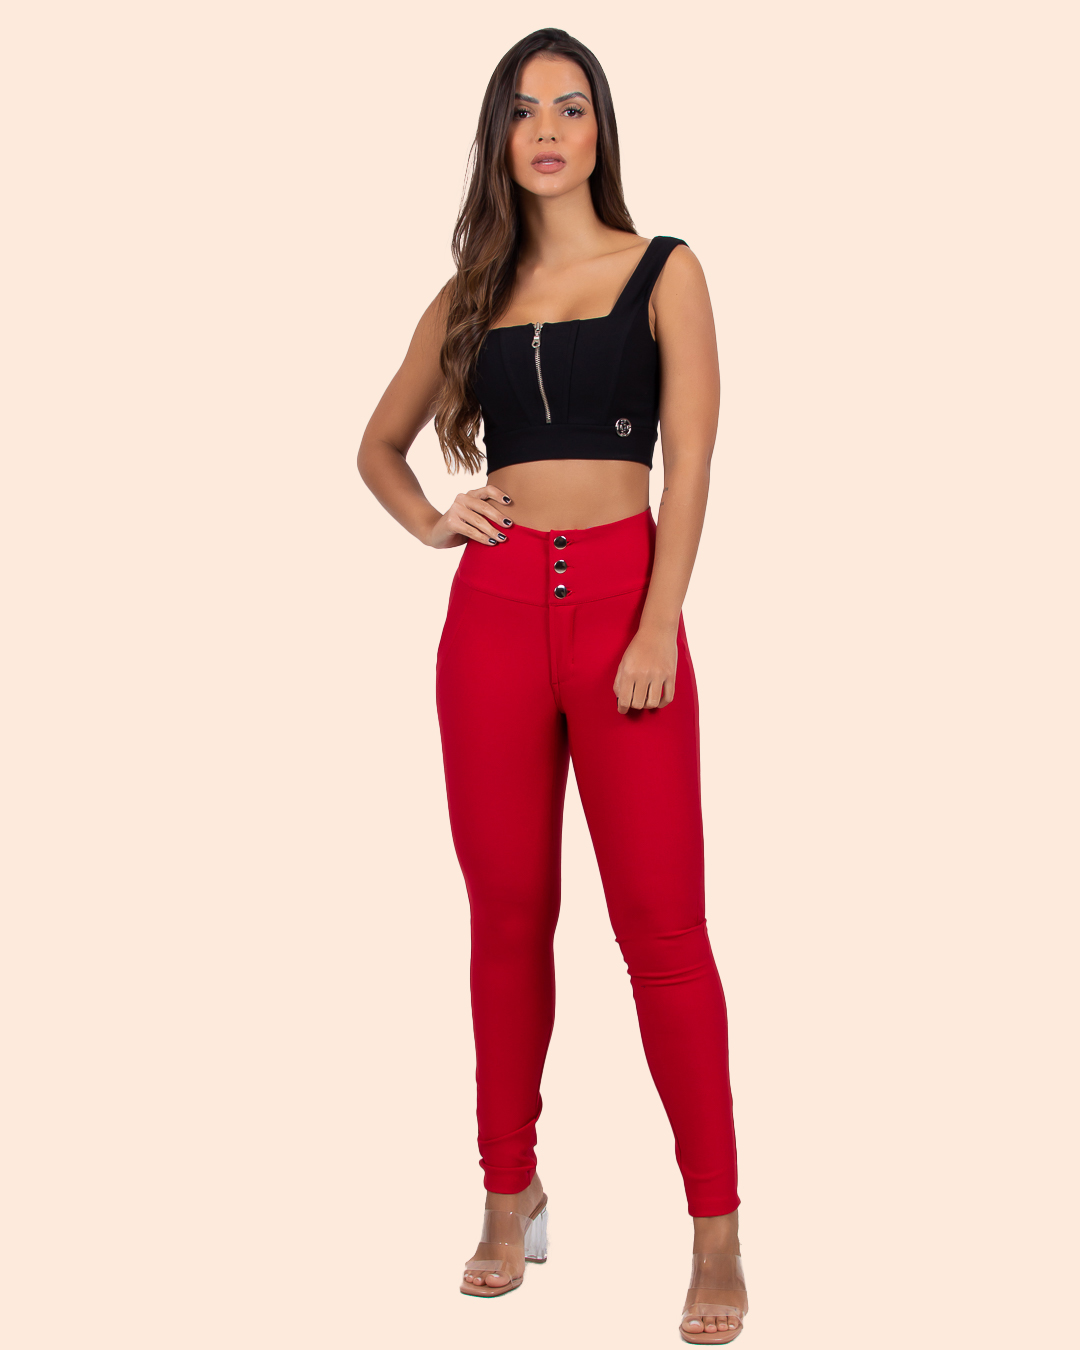 Miss Misses - Miss Misses Pants With Wide Waistband and Buttons Red - 18560VERMELHO